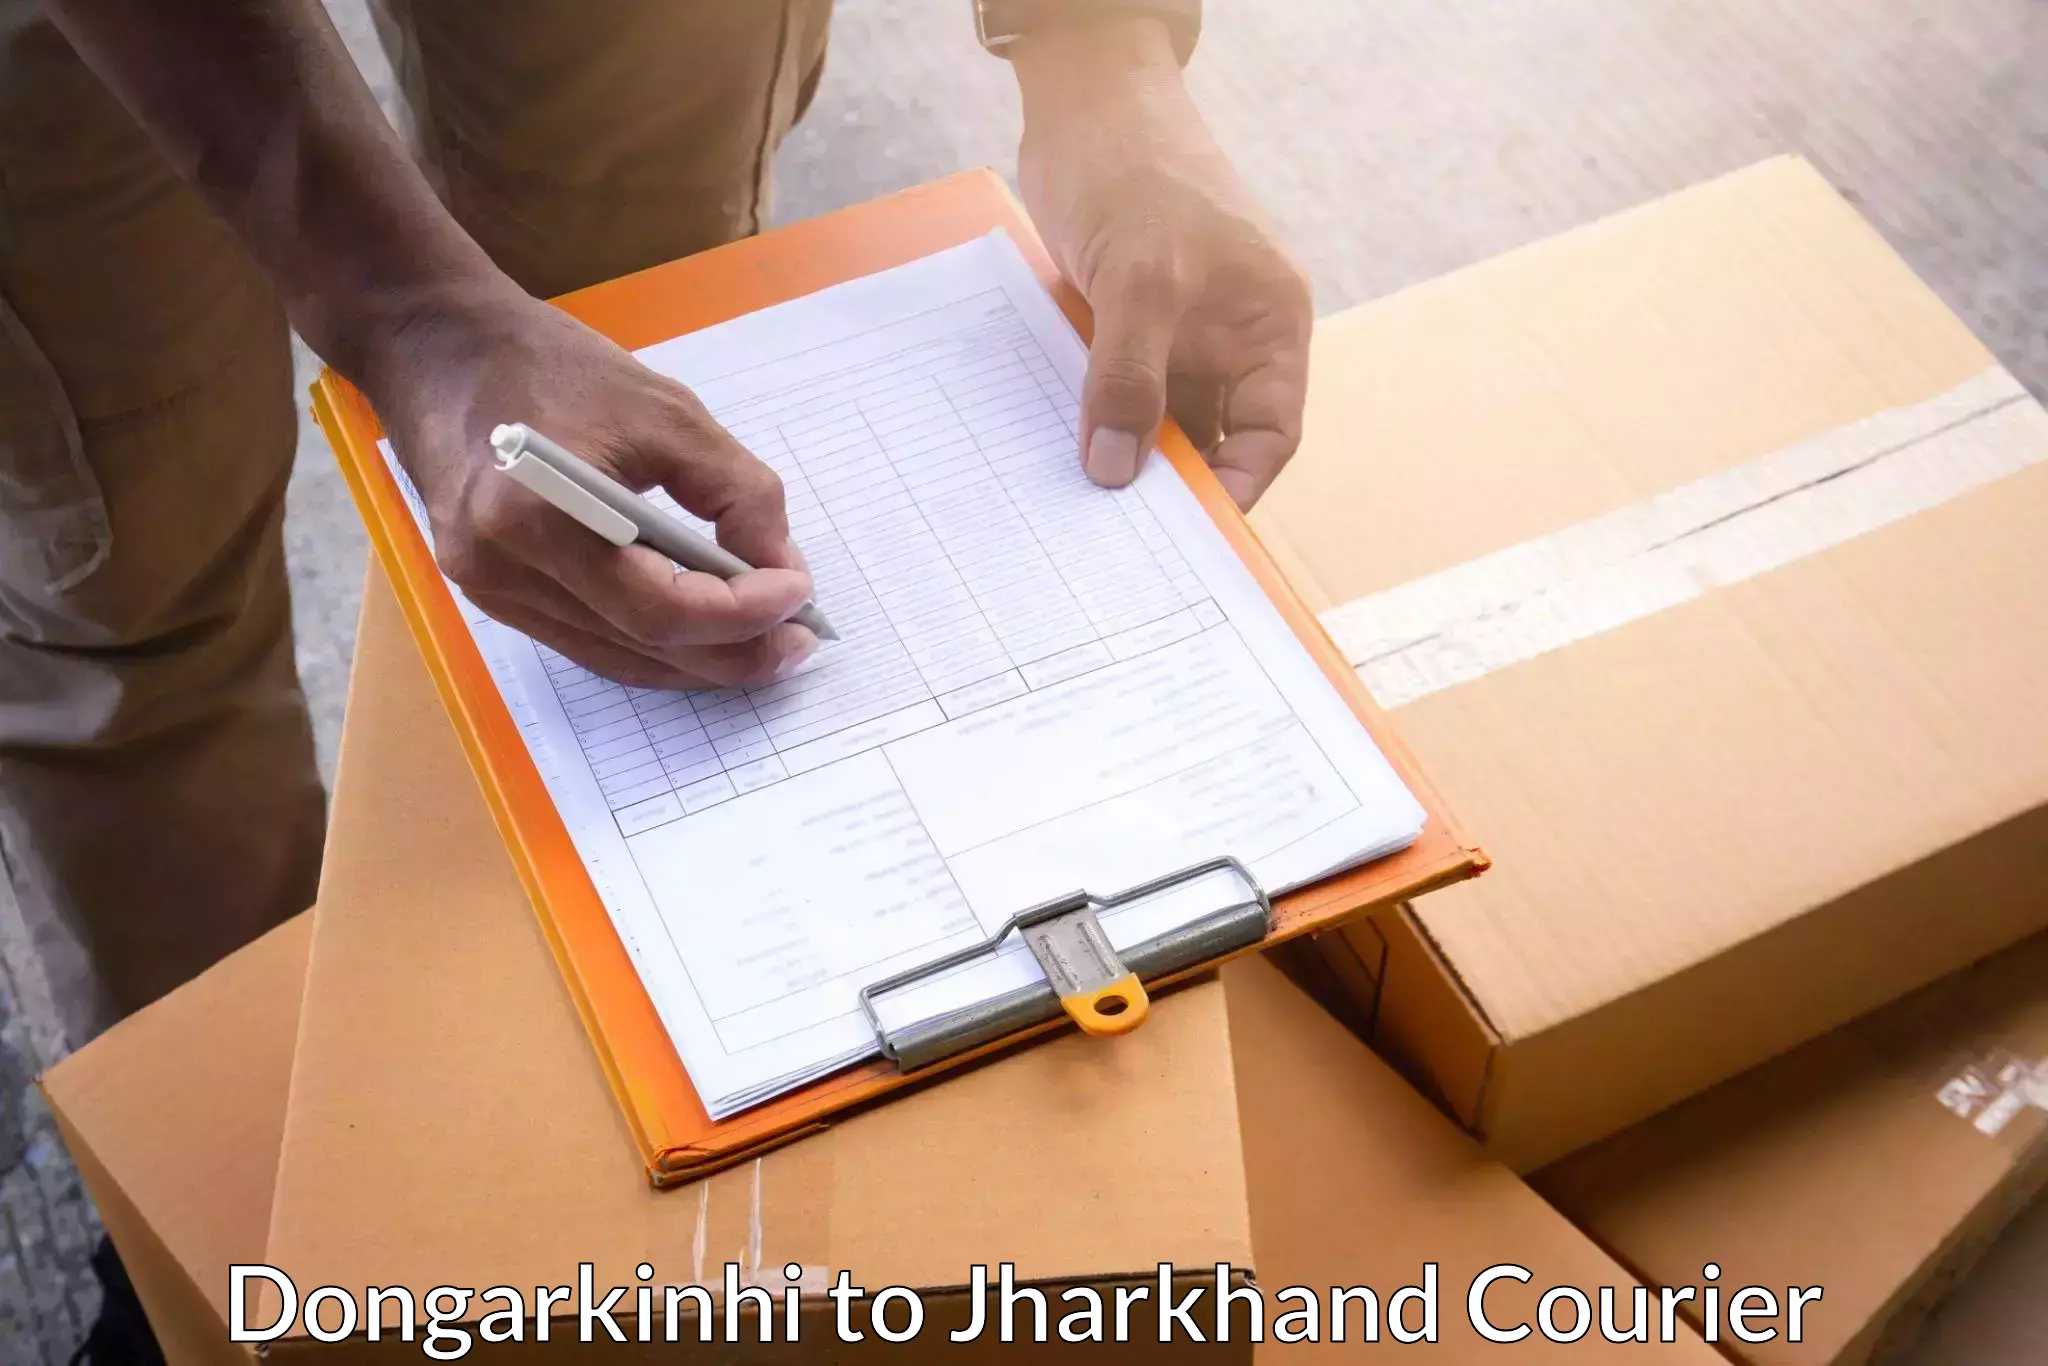 Express package handling in Dongarkinhi to Isri